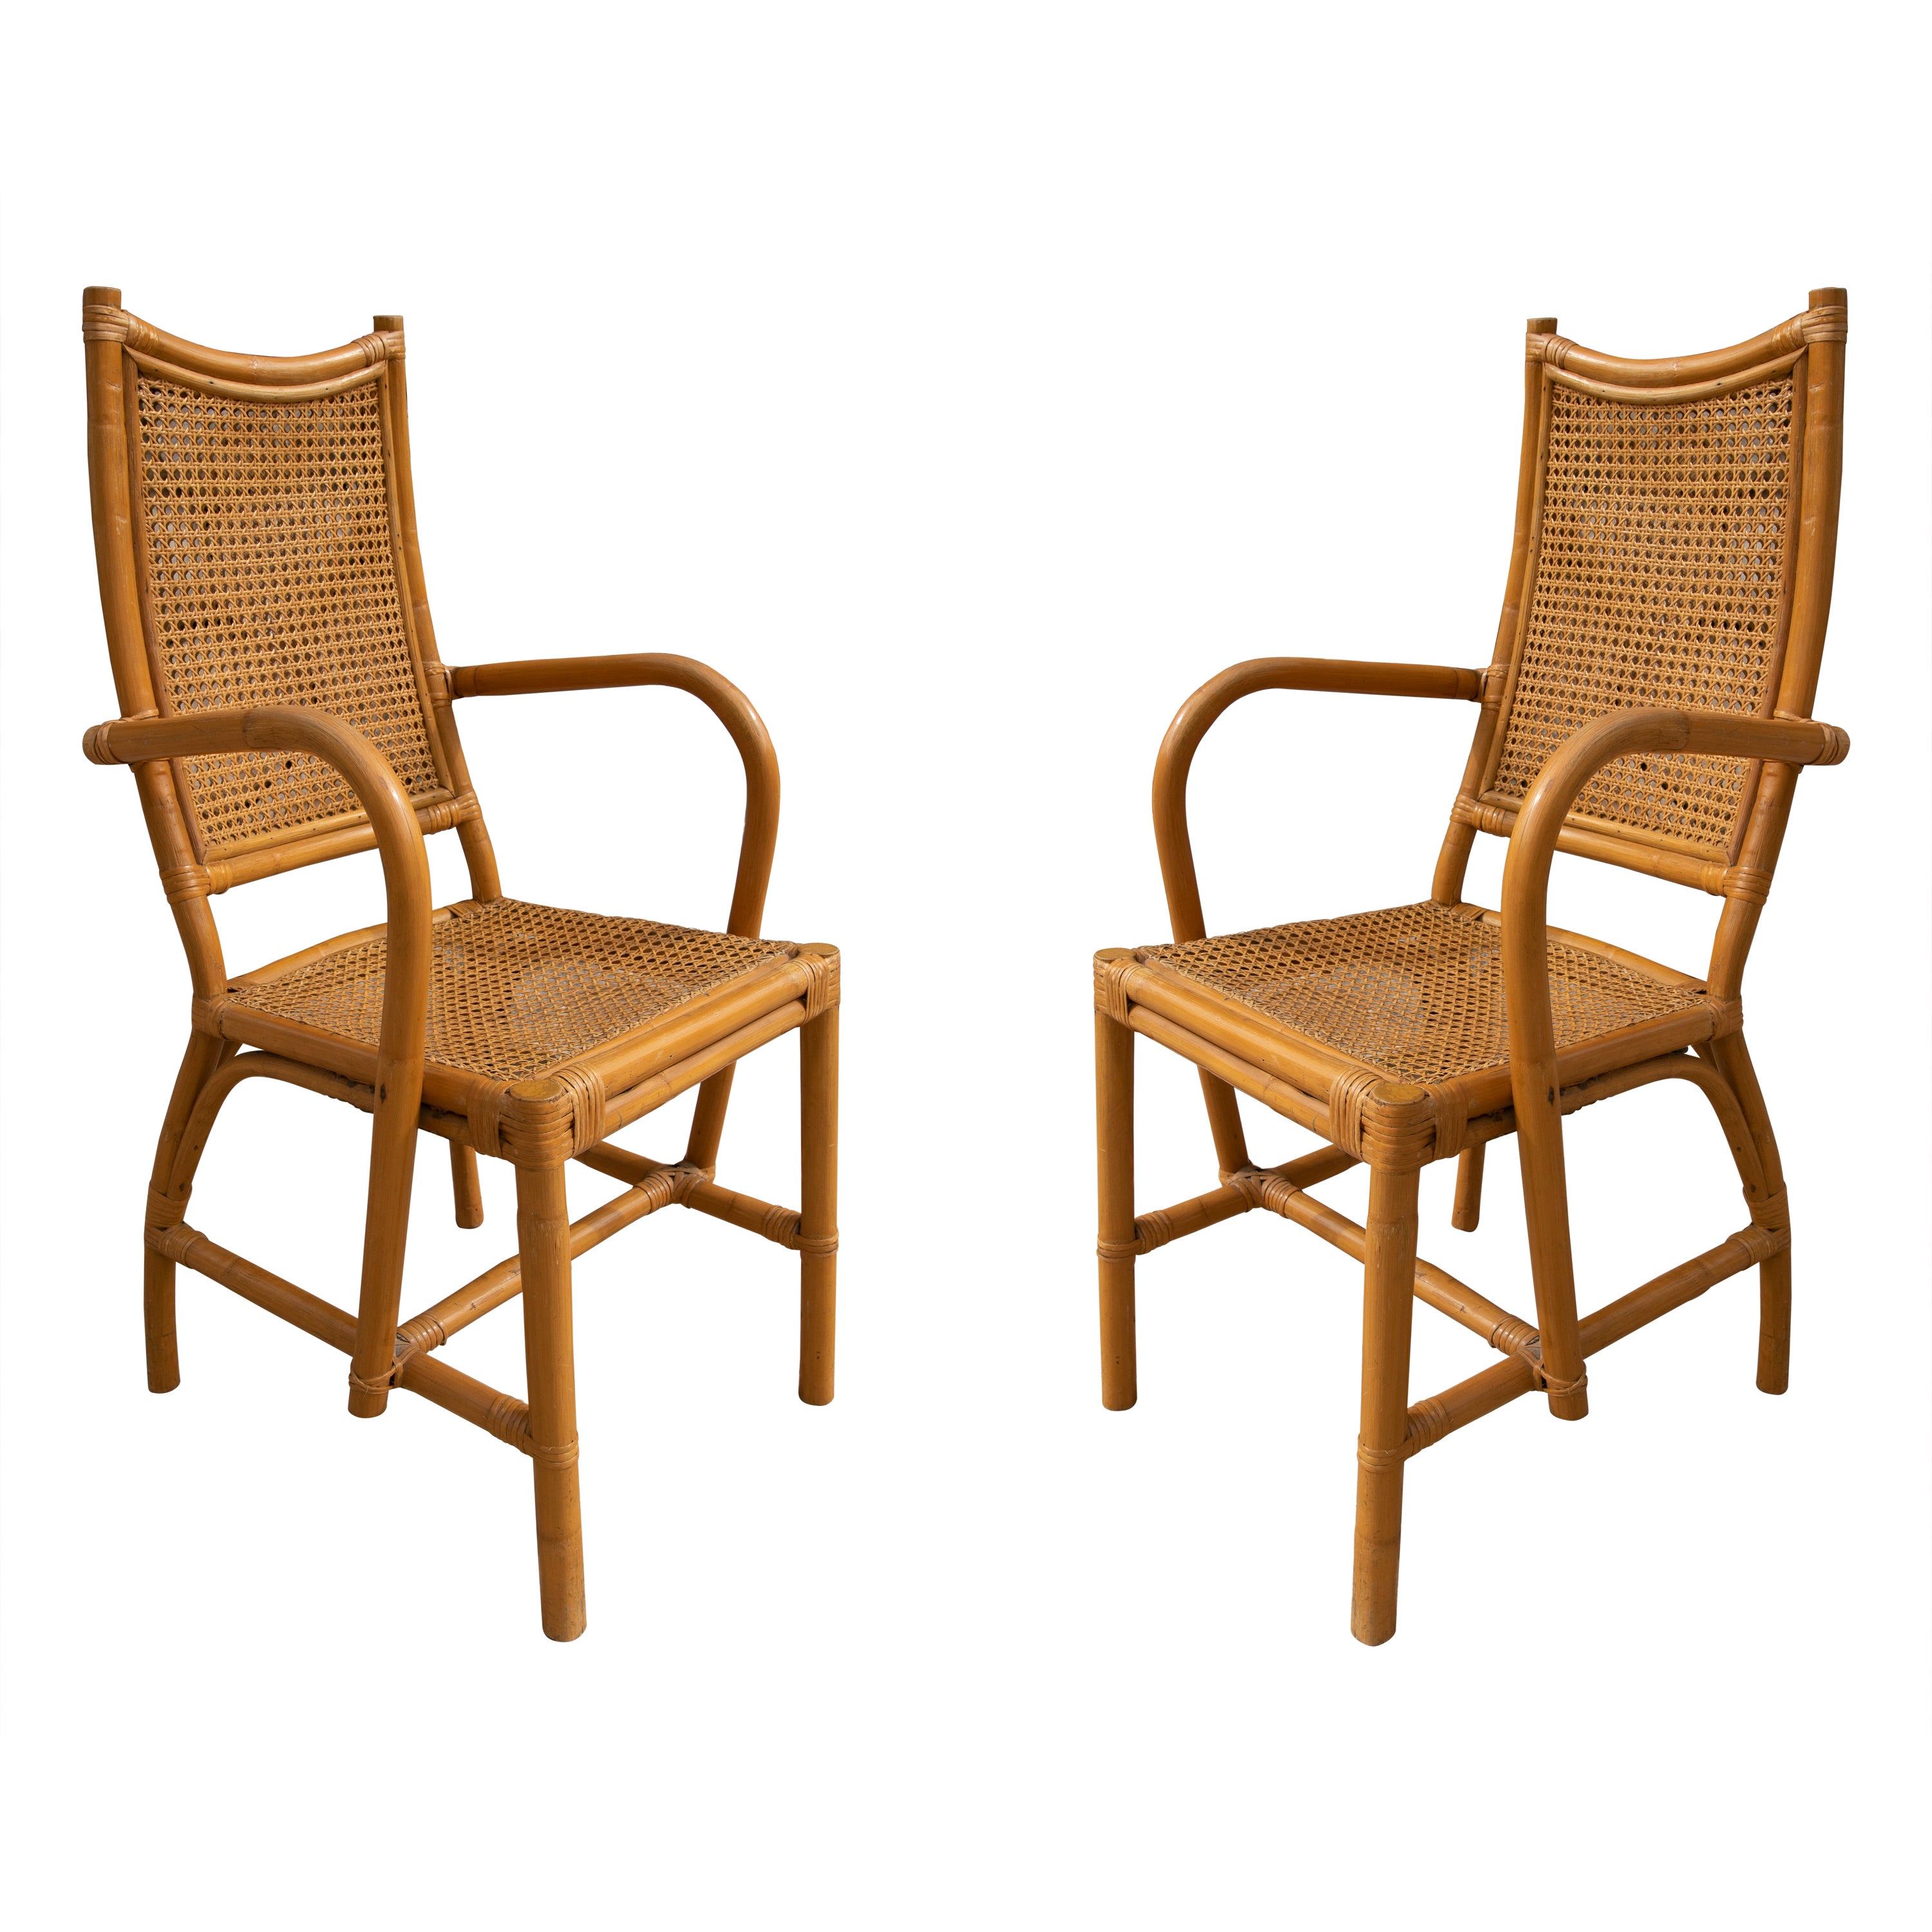 Pair of Spanish Bamboo Armchairs with Rattan Grid Seating and Backrest